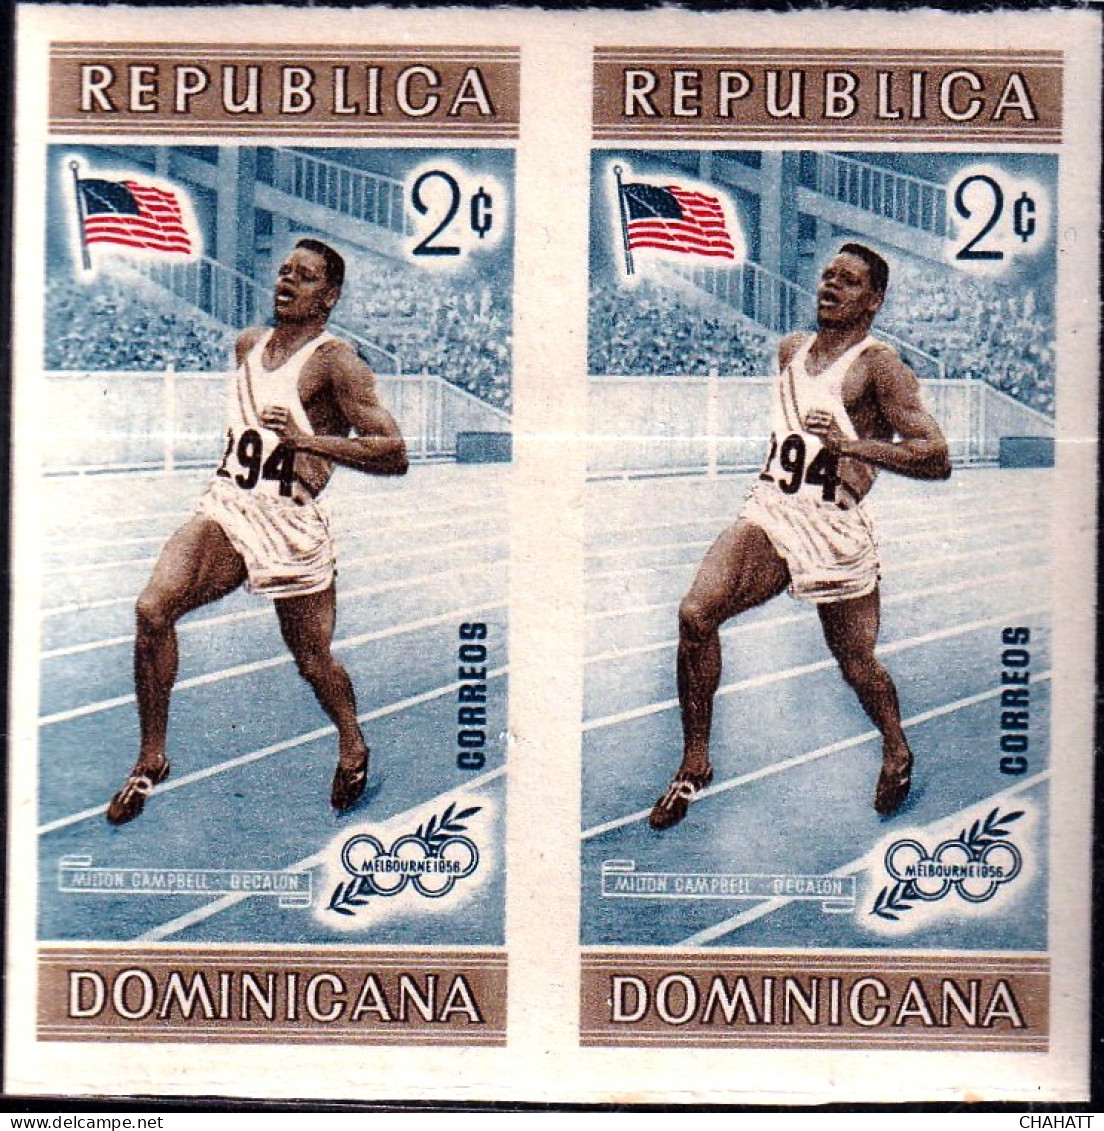 OLYMPICS-1956, MELBOURNE- DECALON (ATHLETICS) IMPERF PAIR-COLOR VARIETY- DOMINICANA-MNH- SCARCE- A5-745 - Verano 1956: Melbourne